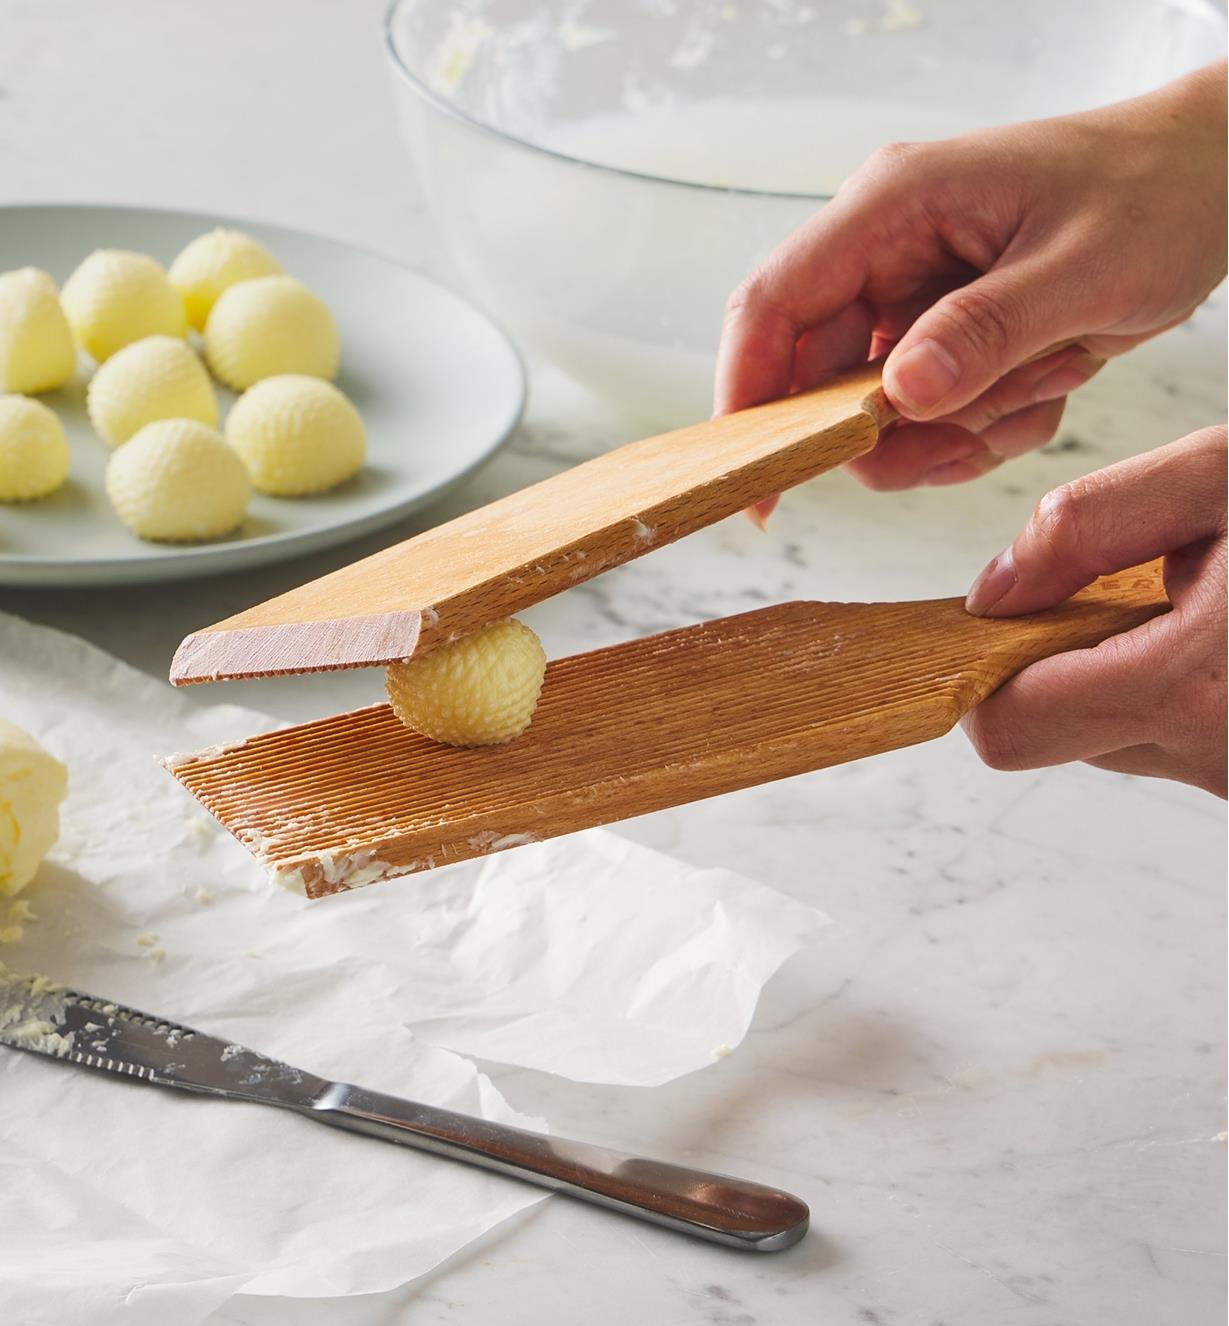 Two paddles being used to form a ball of butter